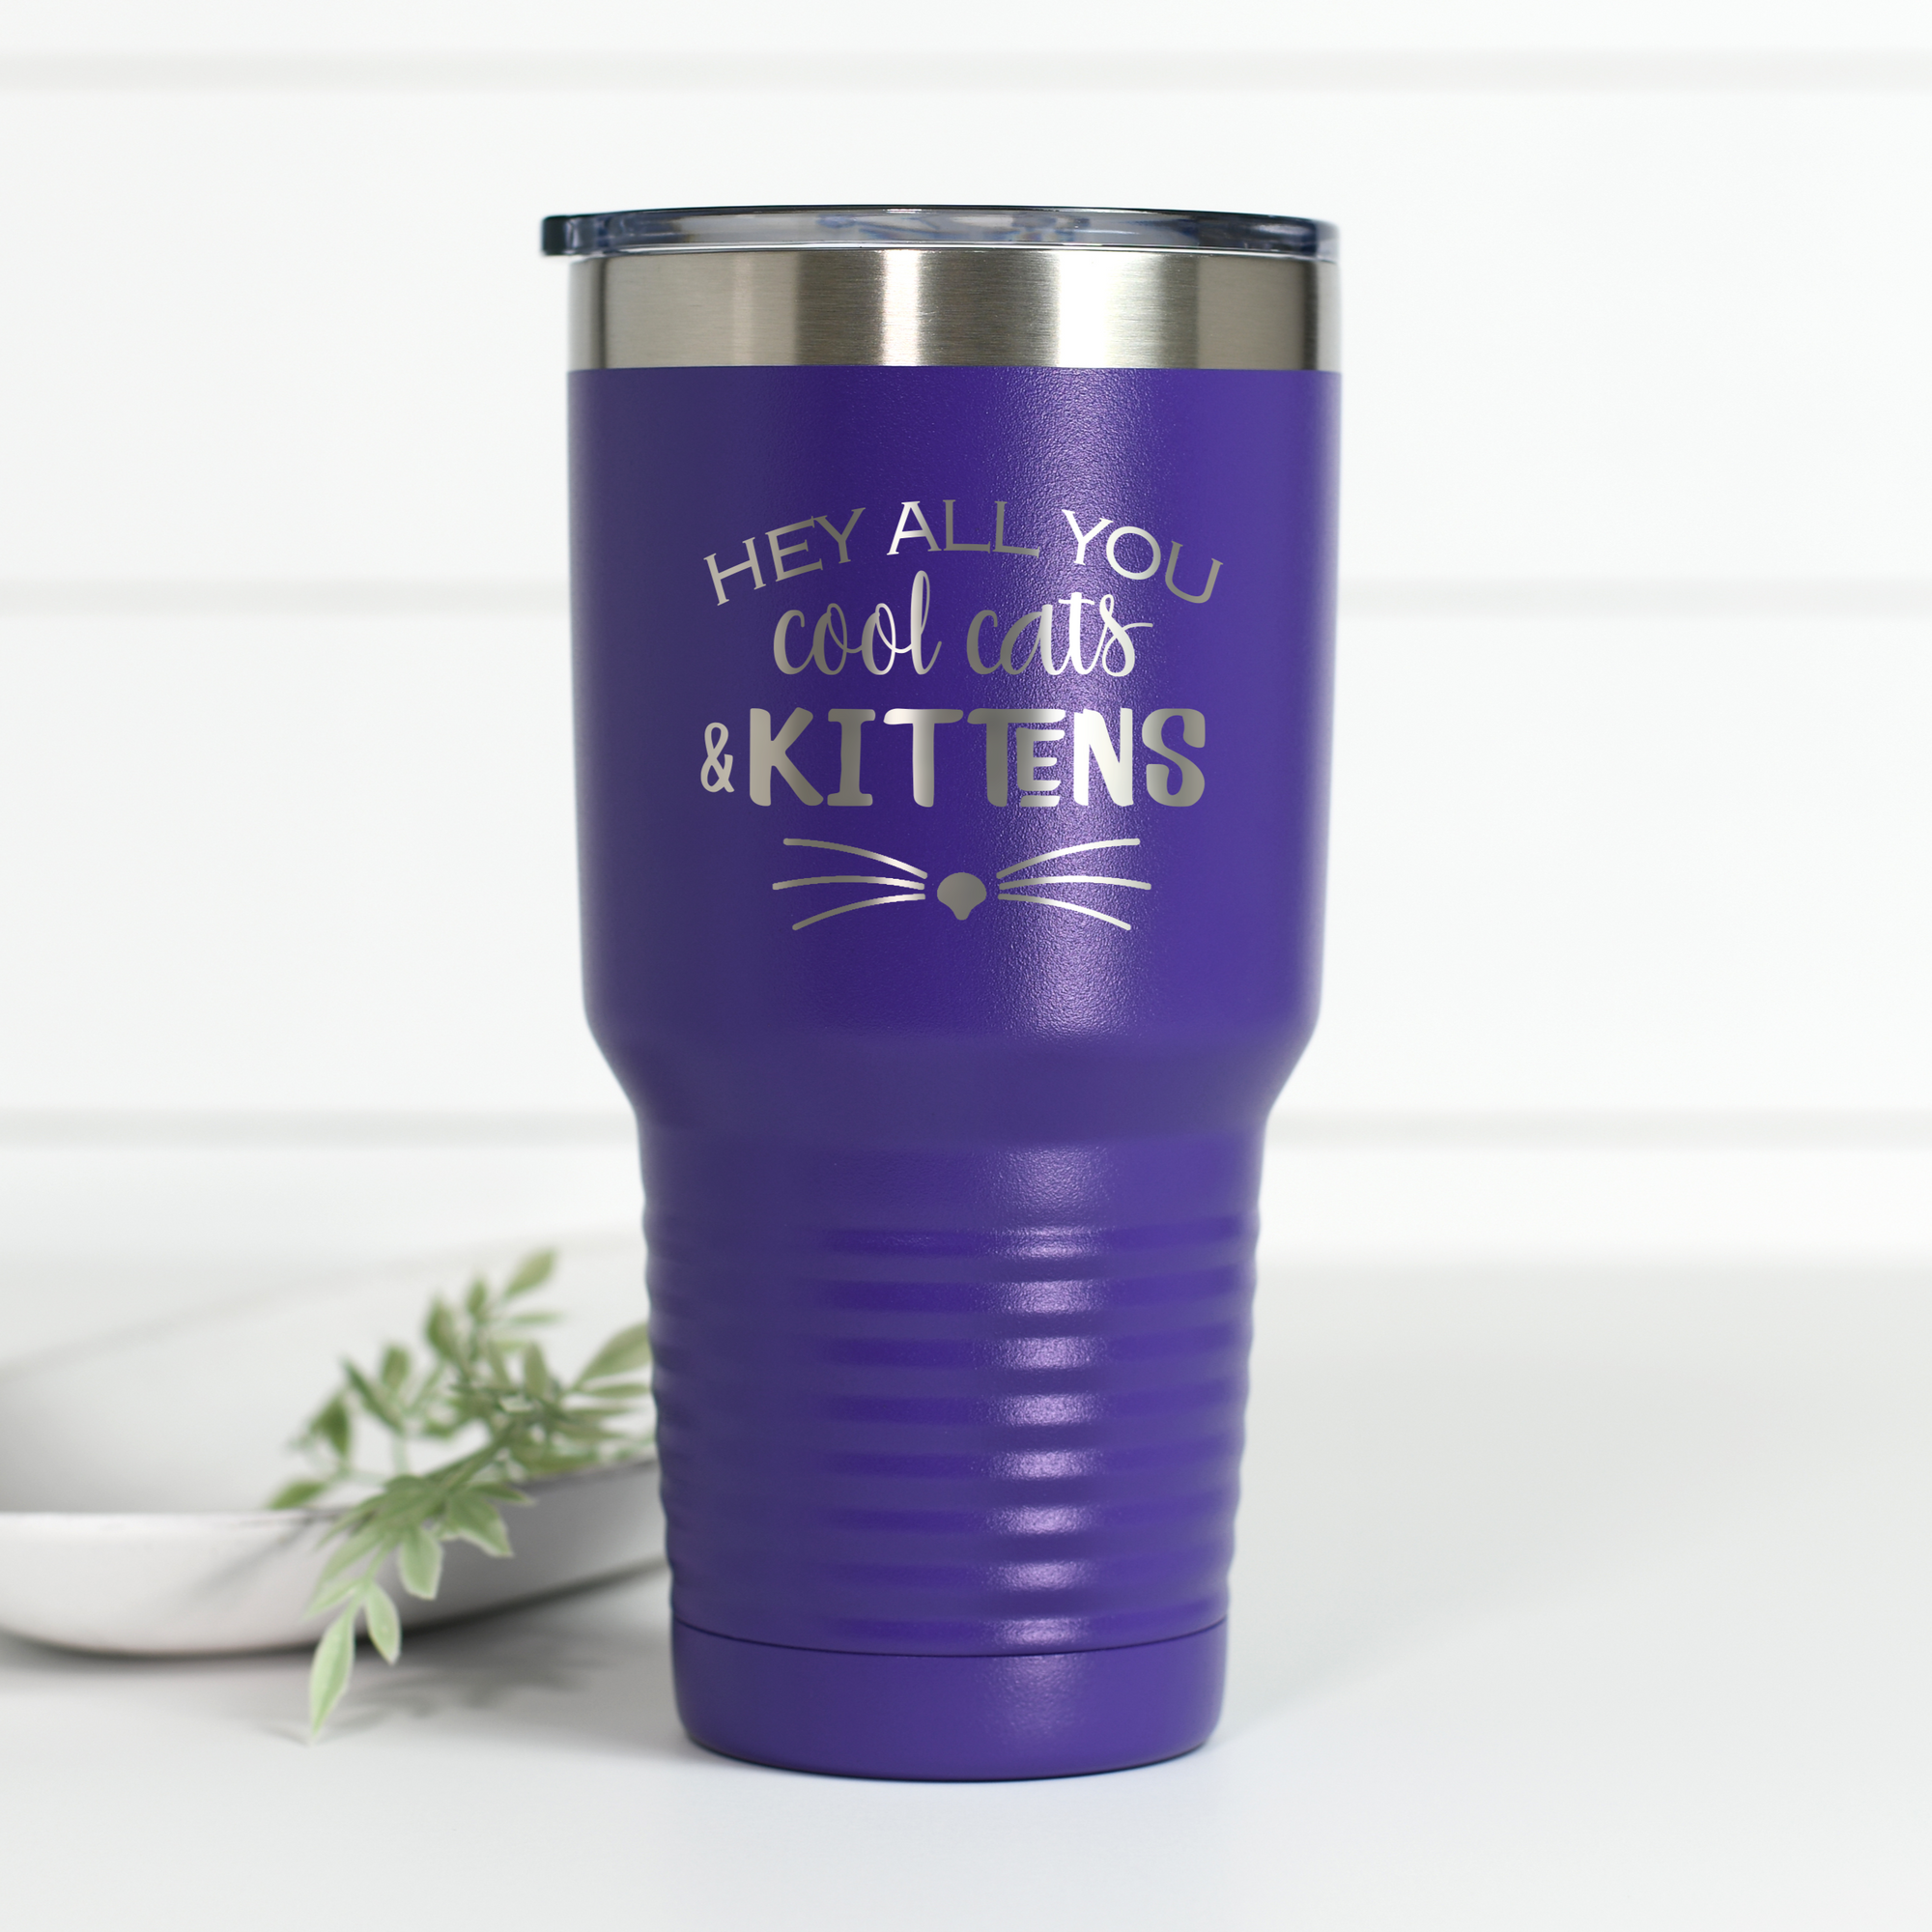 Hey All You Cool Cats and Kittens 30 oz Engraved Tumbler